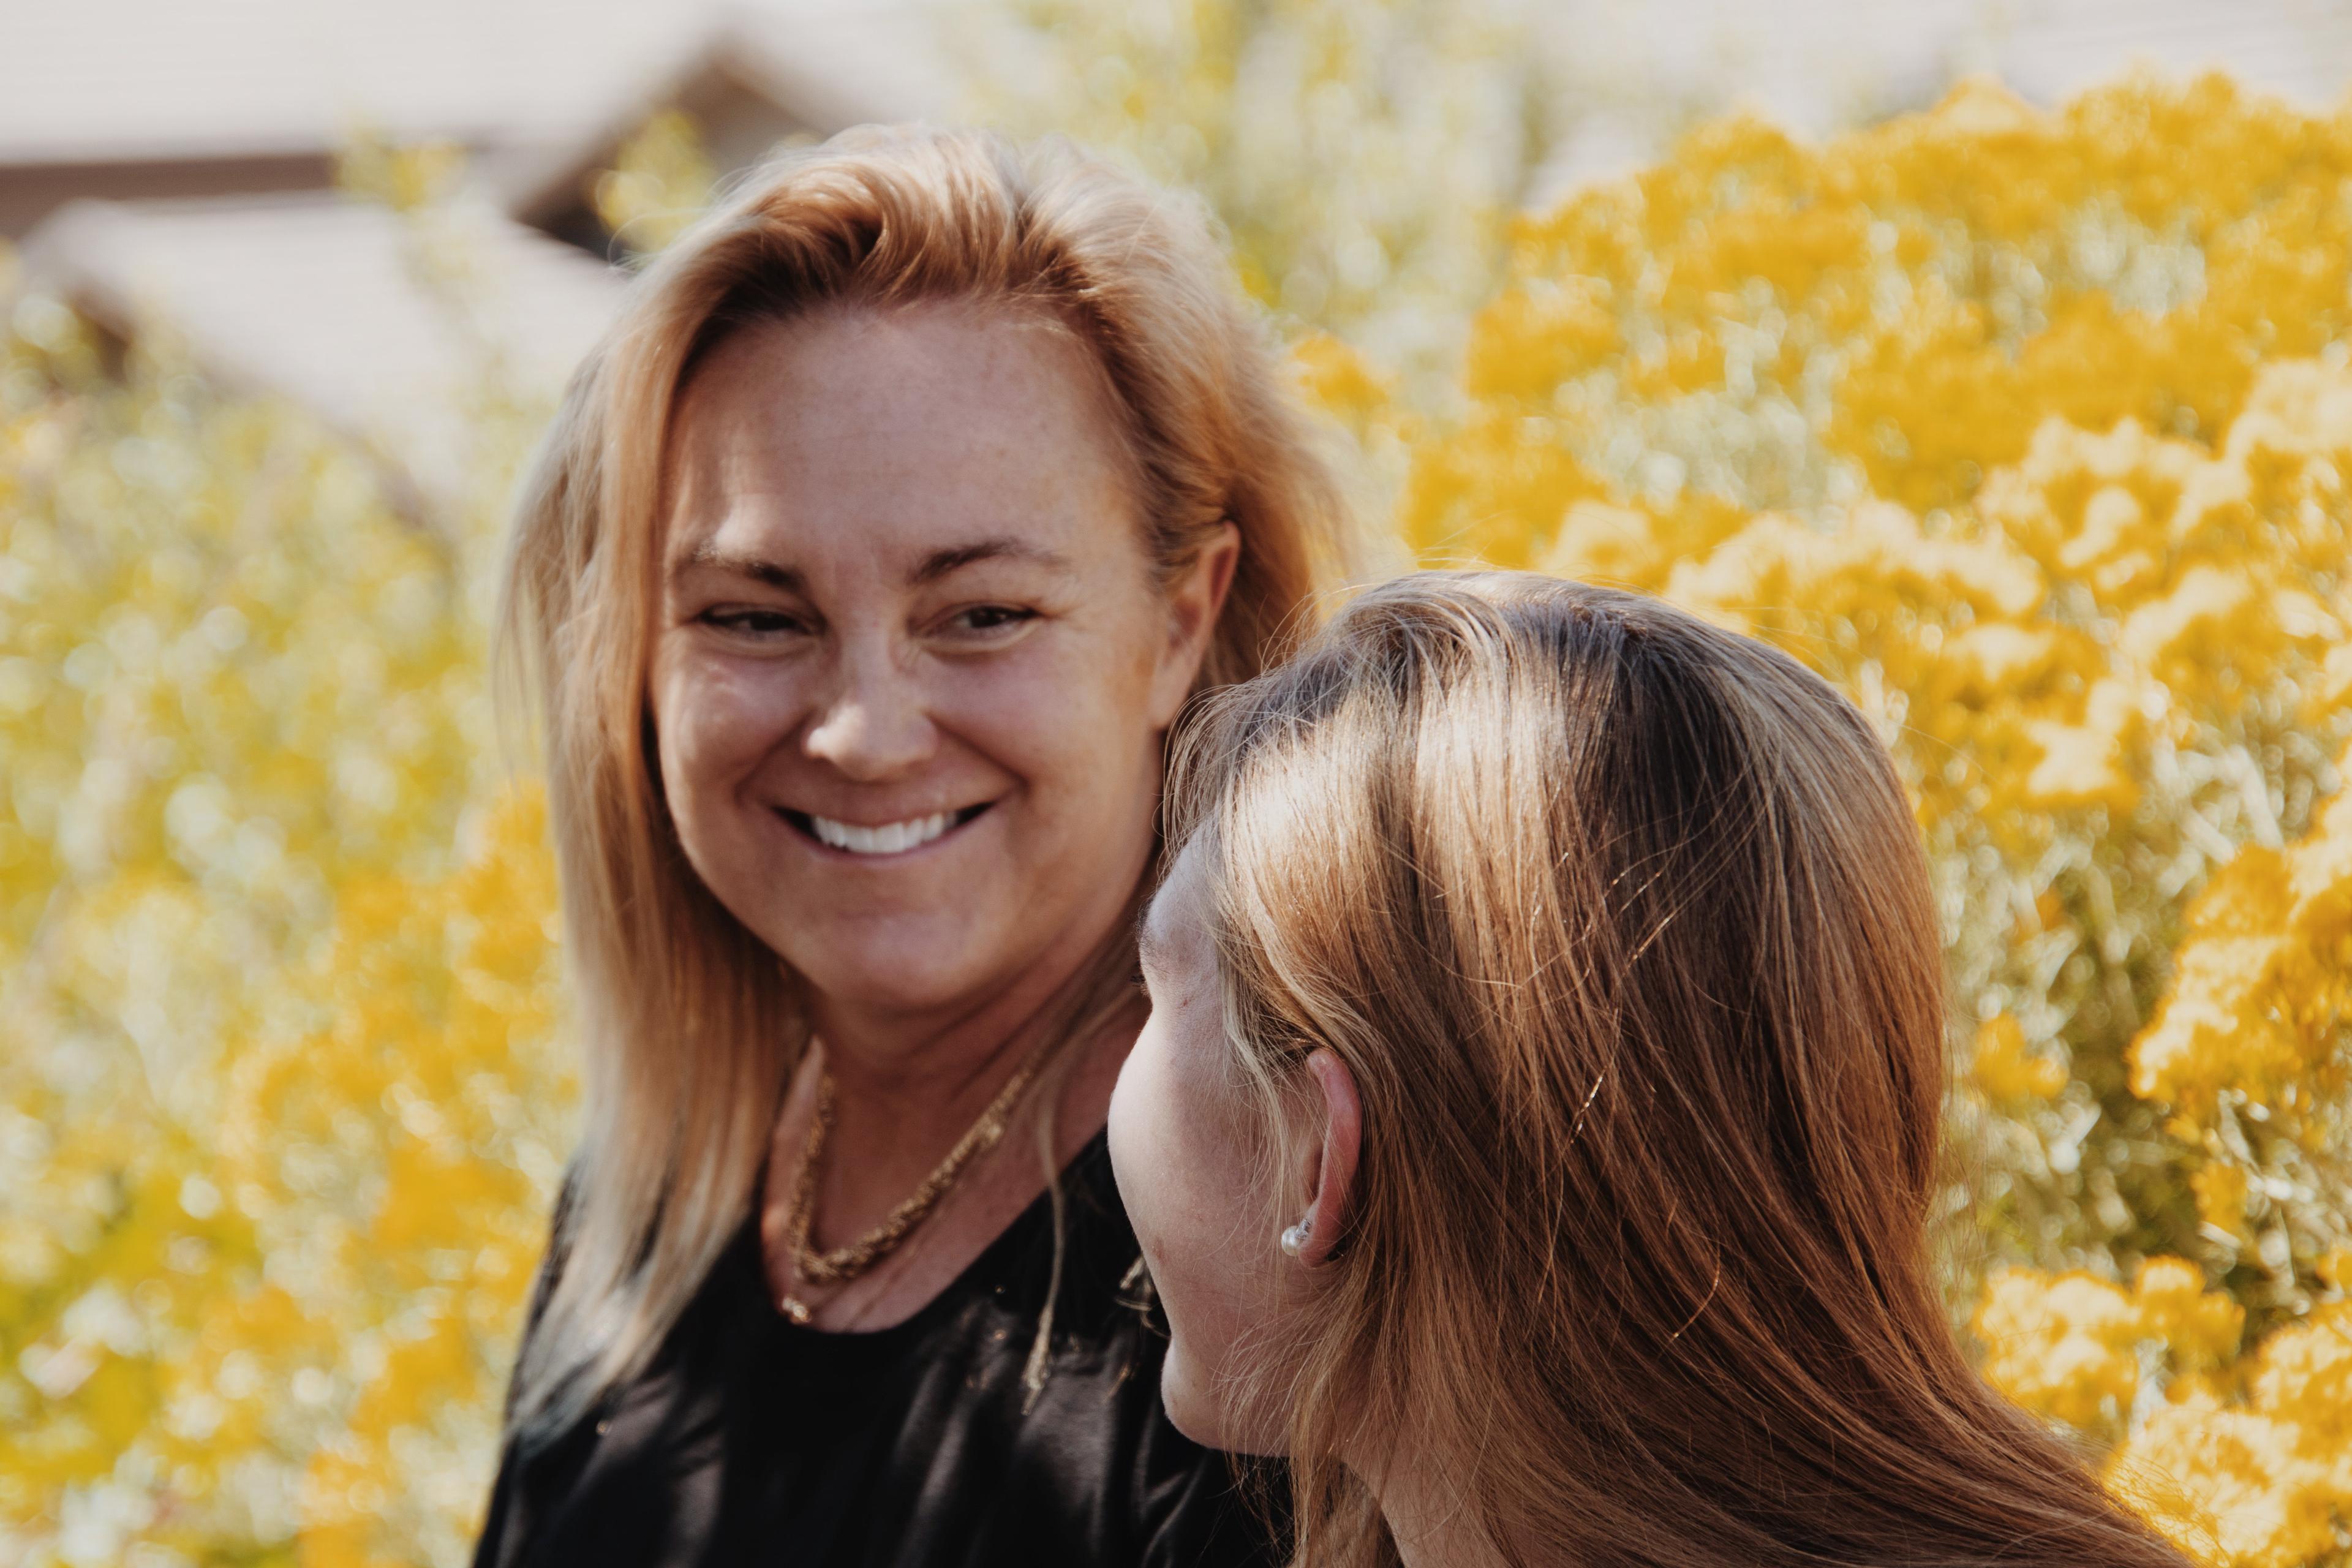 A mother smiles at her adolescent daughter in front of a yellow bush